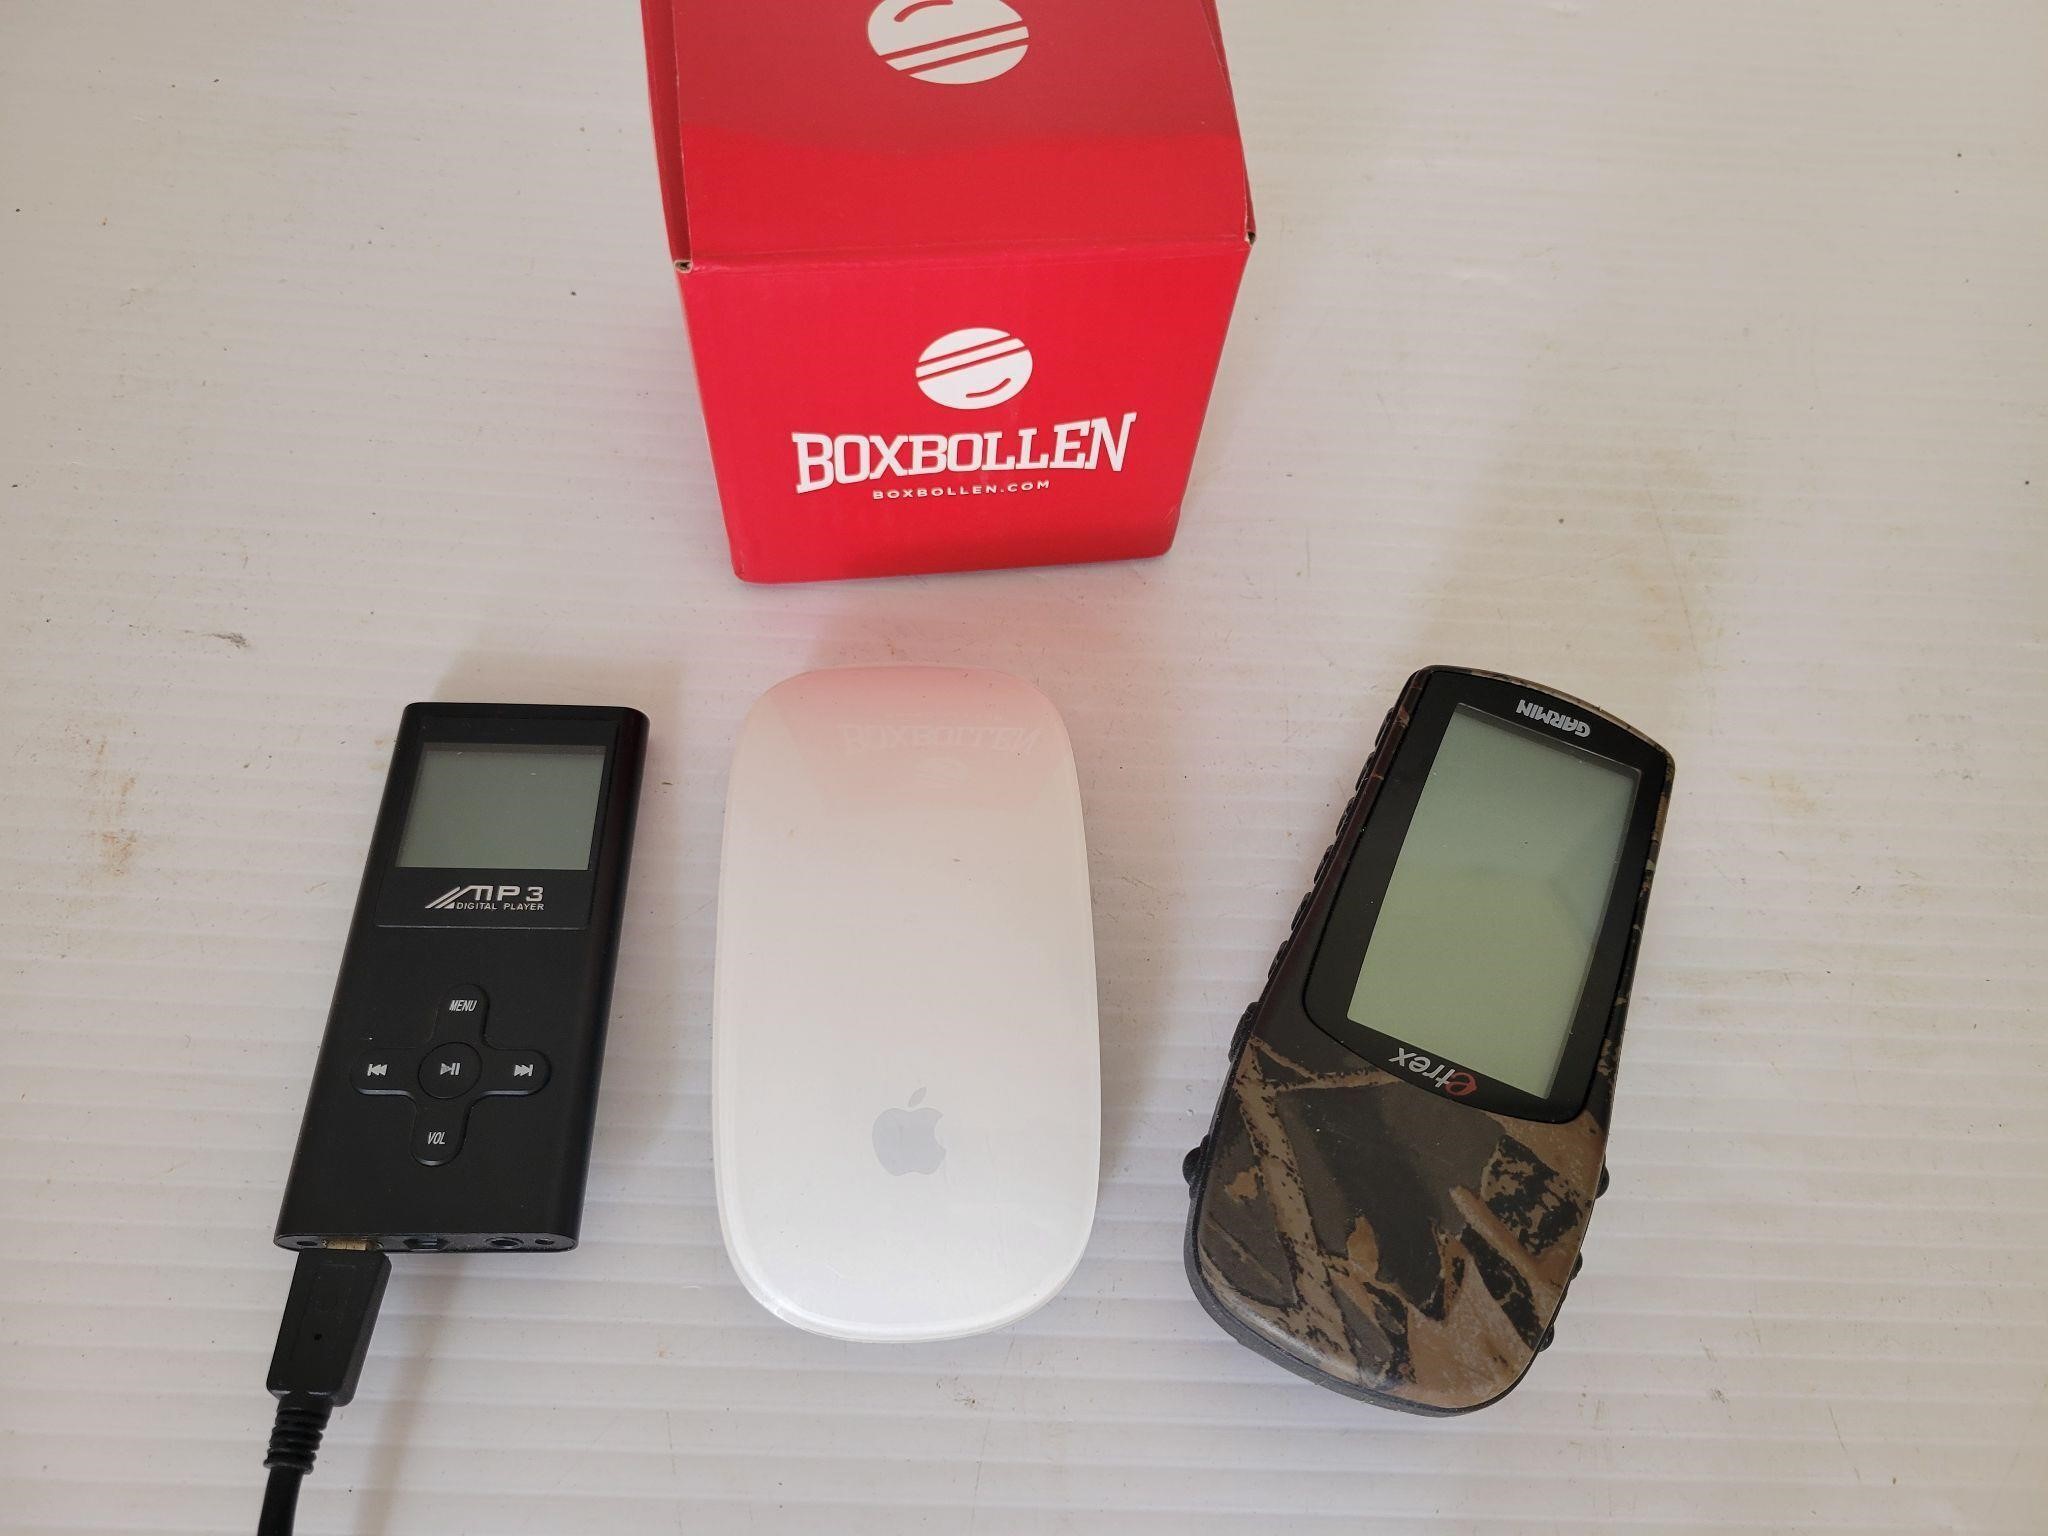 Apple Mouse, Garmin GPS, and more